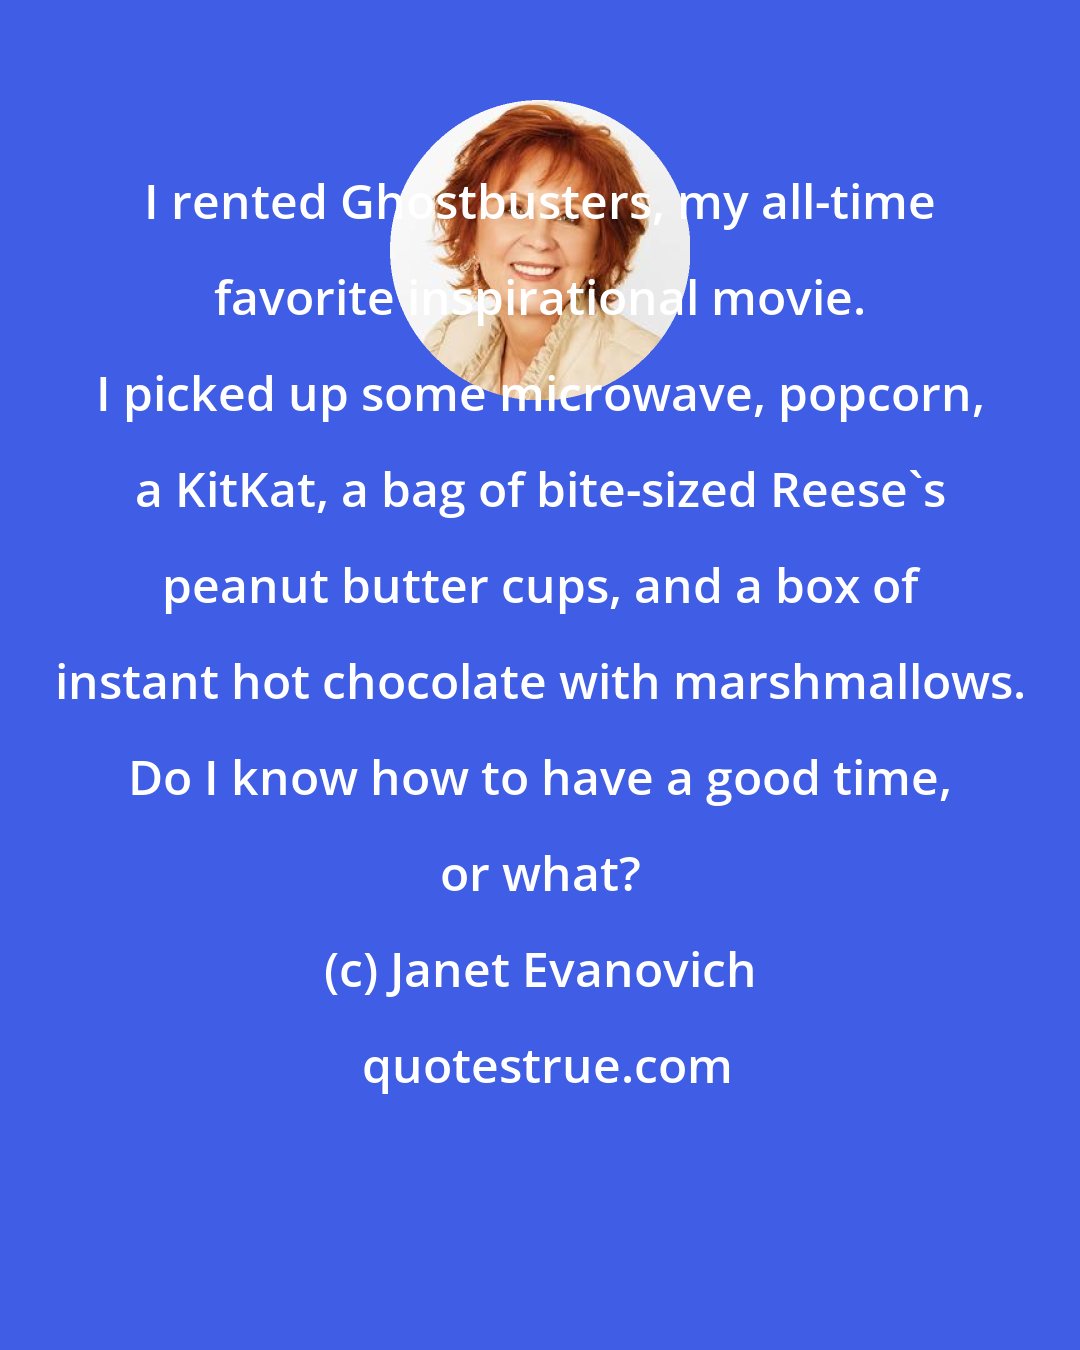 Janet Evanovich: I rented Ghostbusters, my all-time favorite inspirational movie. I picked up some microwave, popcorn, a KitKat, a bag of bite-sized Reese's peanut butter cups, and a box of instant hot chocolate with marshmallows. Do I know how to have a good time, or what?